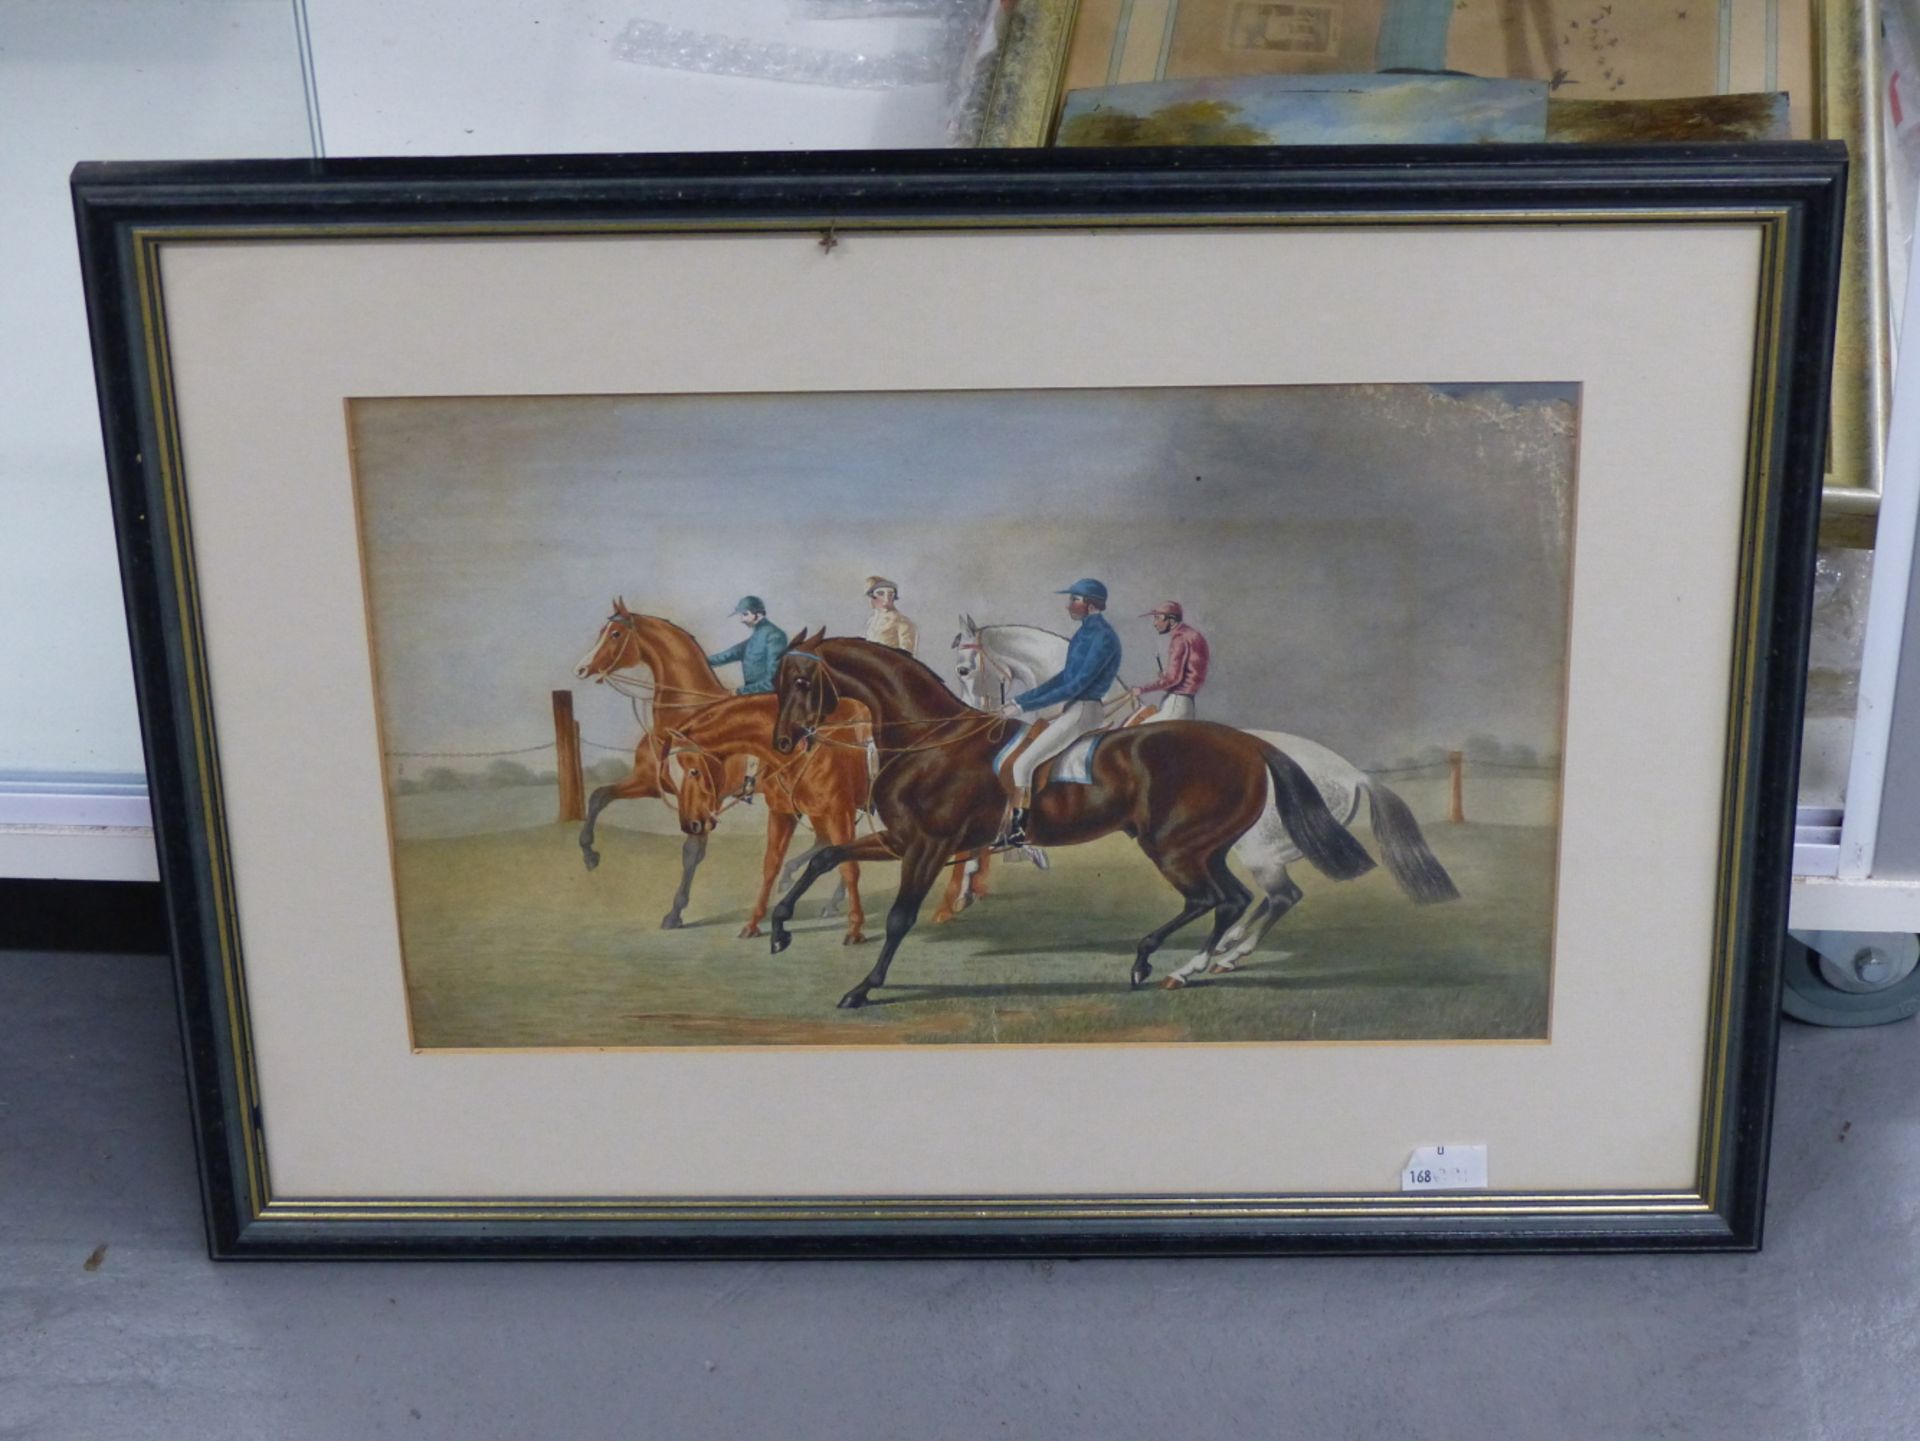 19th C. ENGLISH SCHOOL DANIEL O'ROUKE WINNING HE DERBY 1852, REPUTEDLY BY JAMES G. NOBLE, - Image 23 of 26